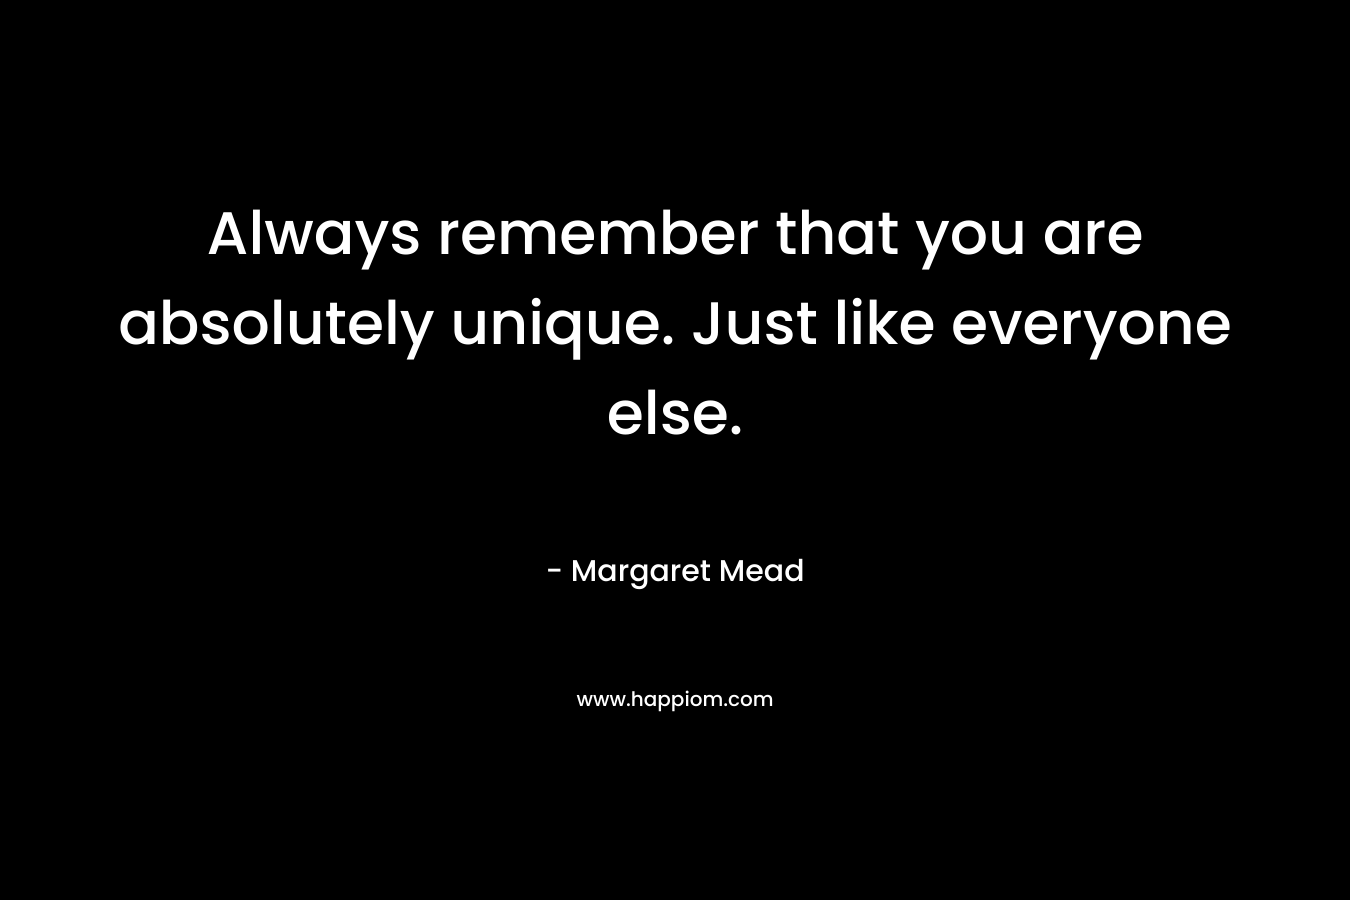 Always remember that you are absolutely unique. Just like everyone else. – Margaret Mead